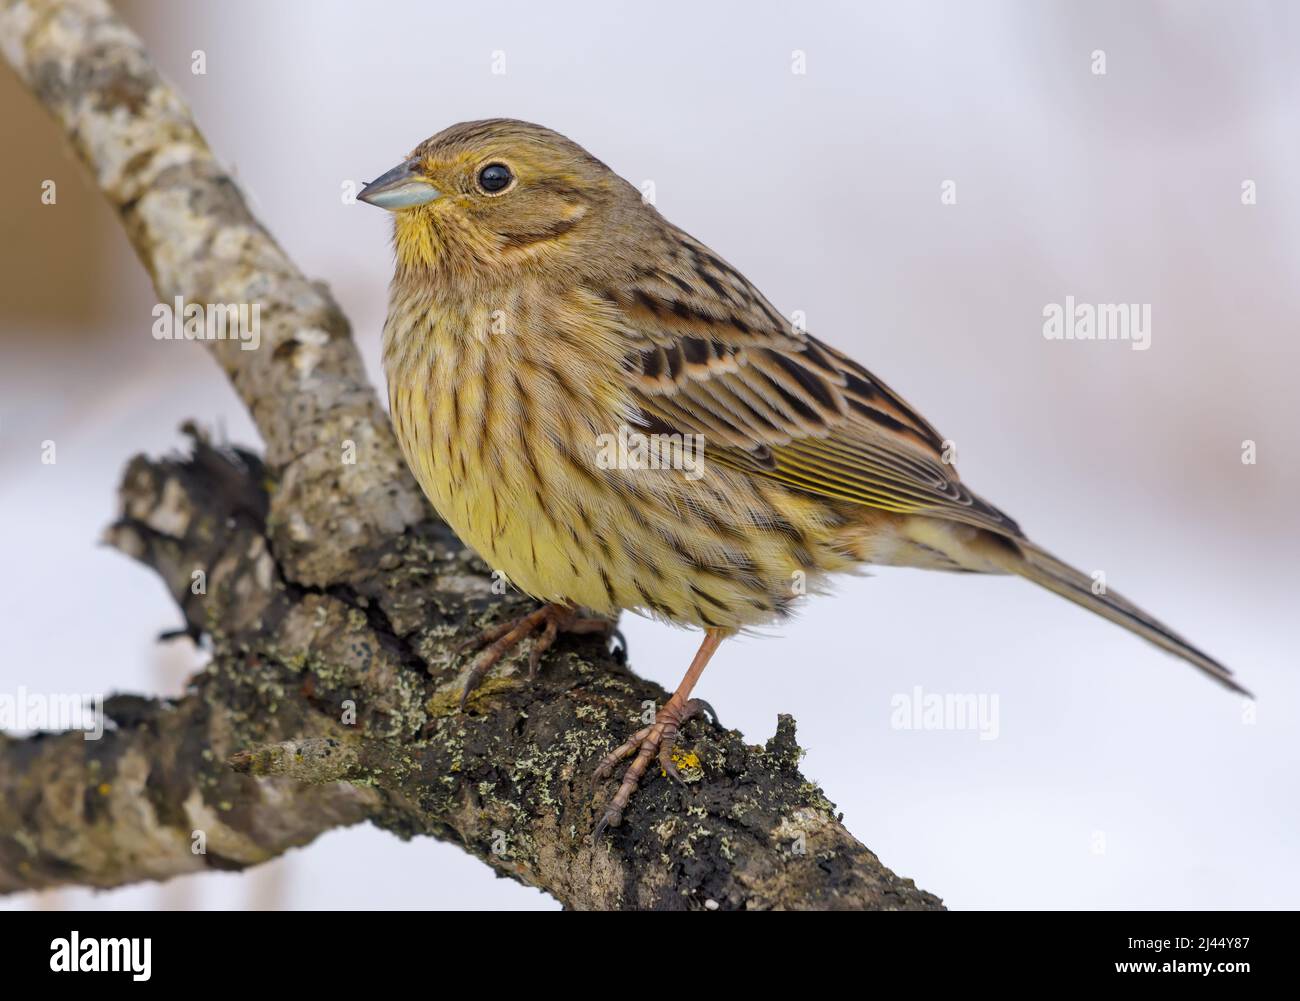 Female Yellowhammer (Emberiza citrinella) posing perched on an aged branch in winter season Stock Photo